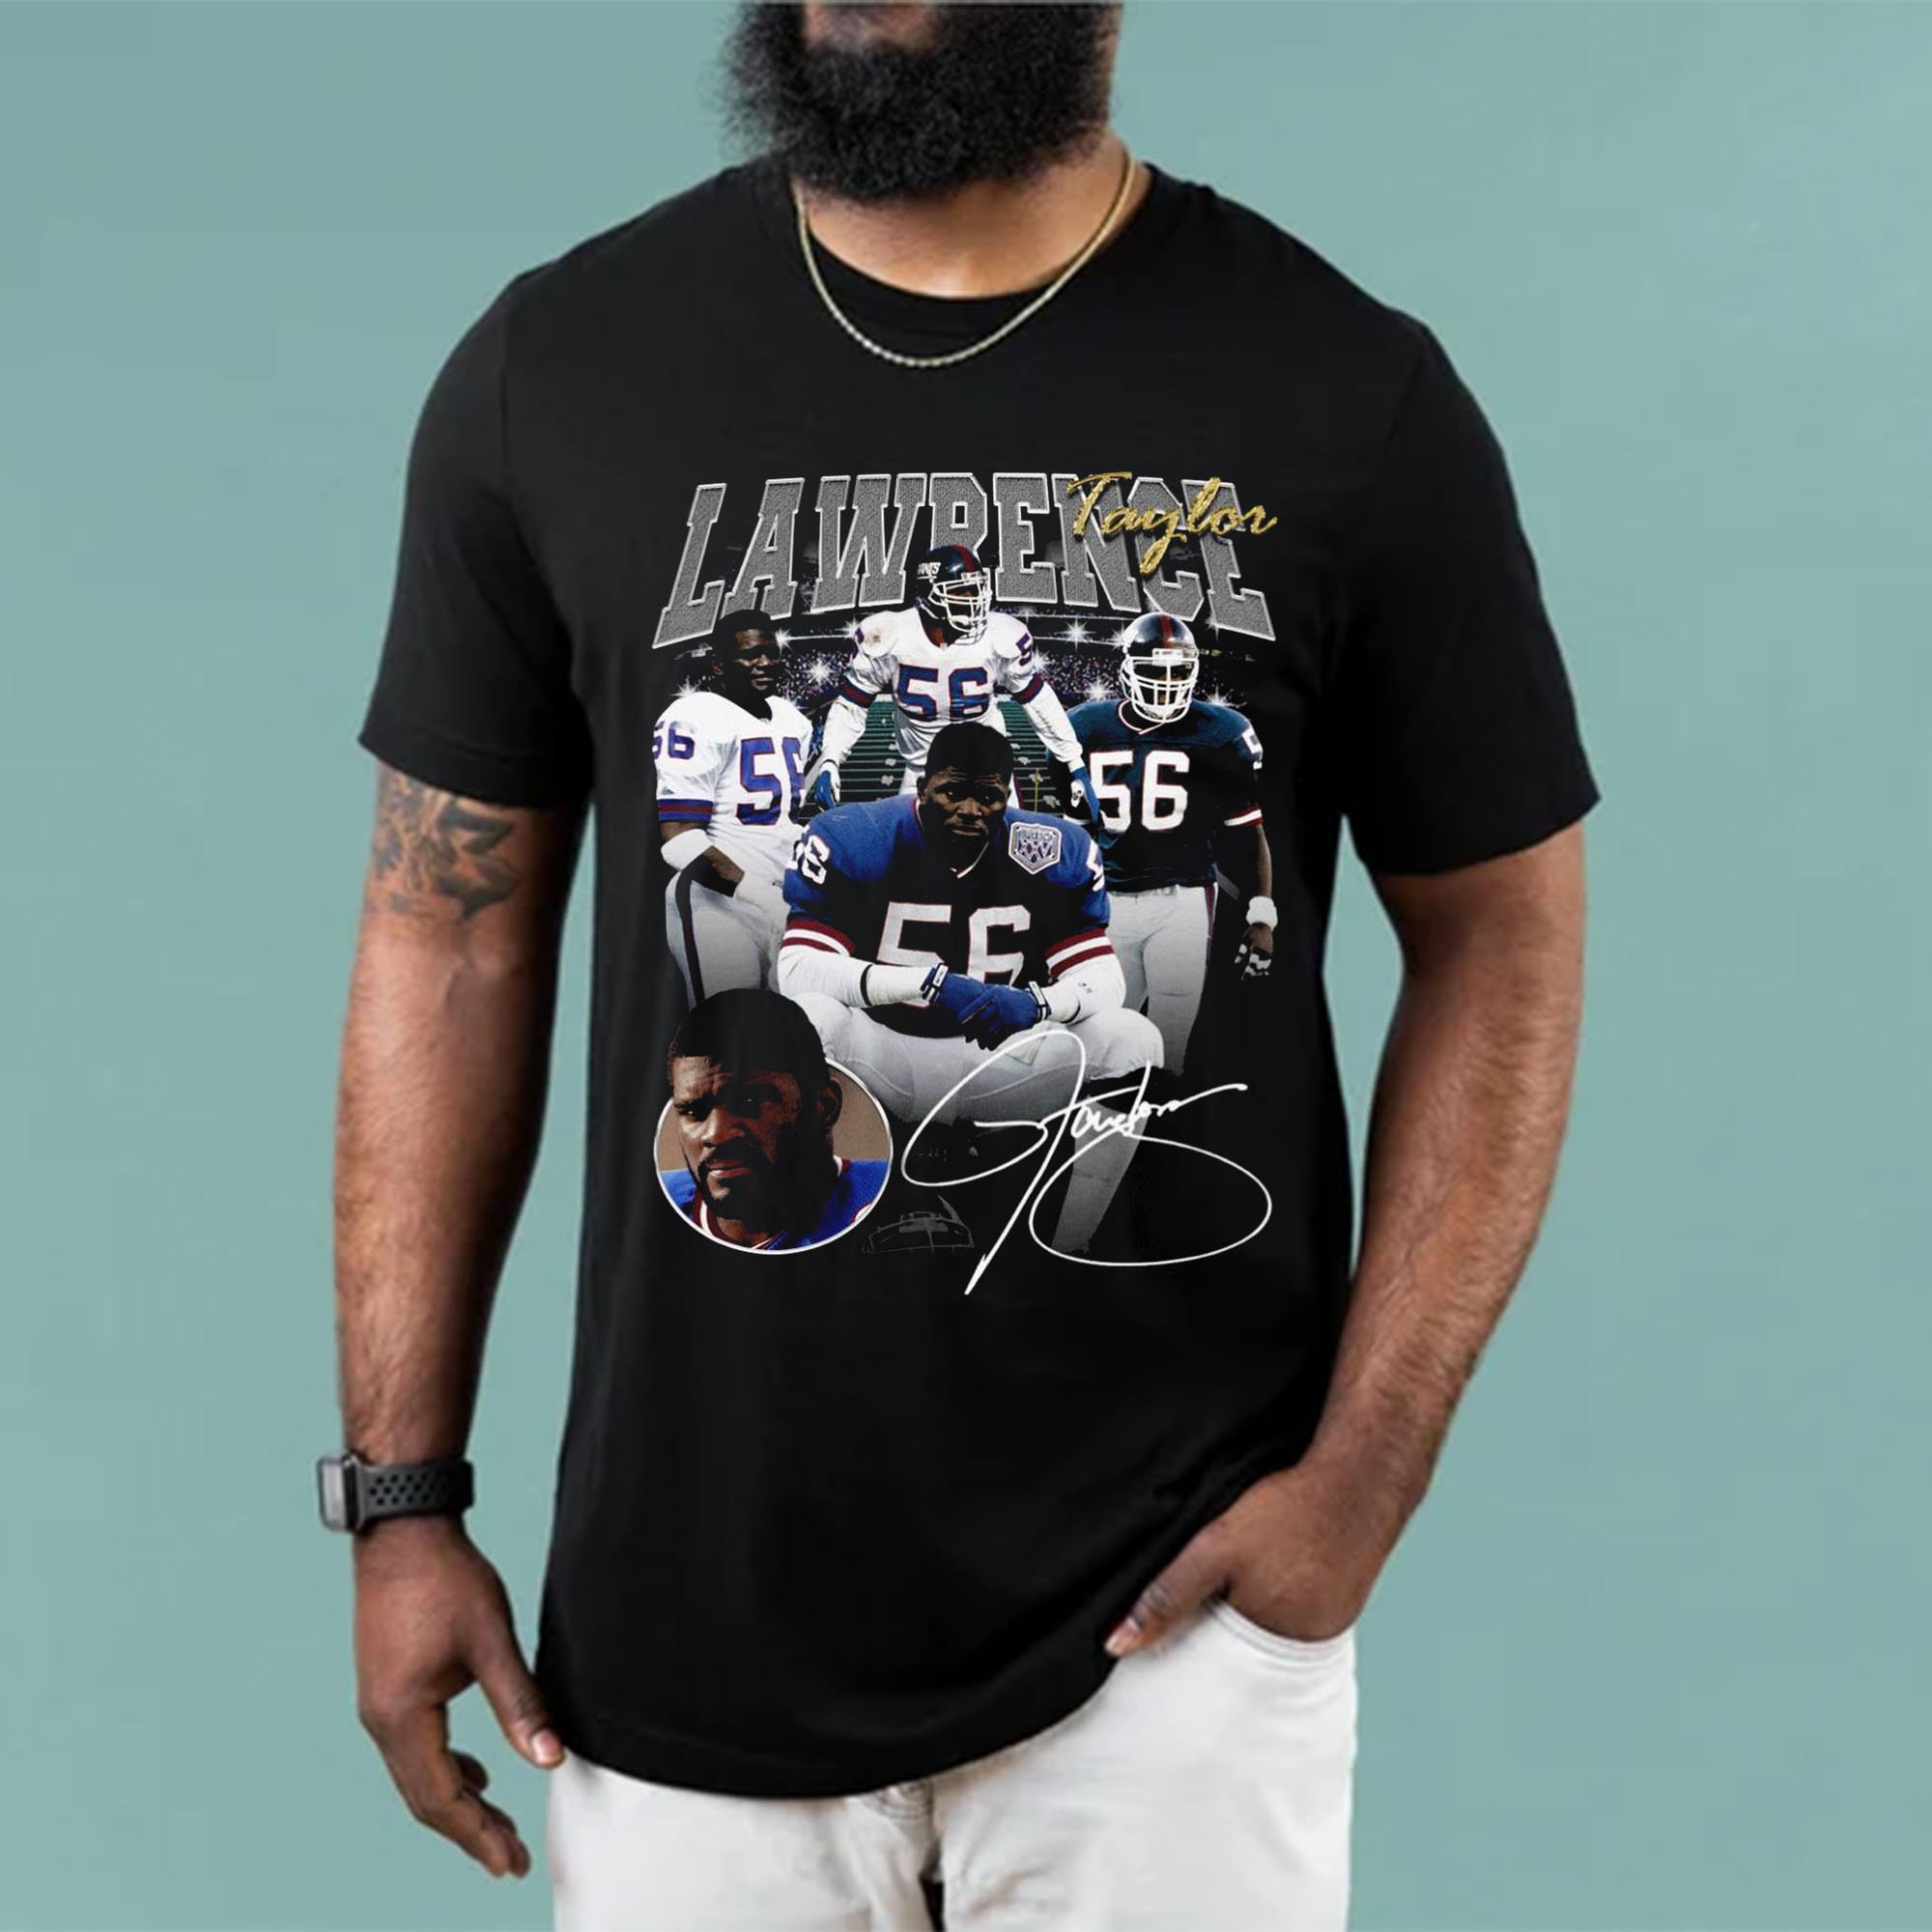 Lawrence Taylor Shirt Lawrence Taylor Vintage Style Graphic Tee,Legend Giants Football Shirt,Lawrence Taylor Player Football Fan Lover Gift